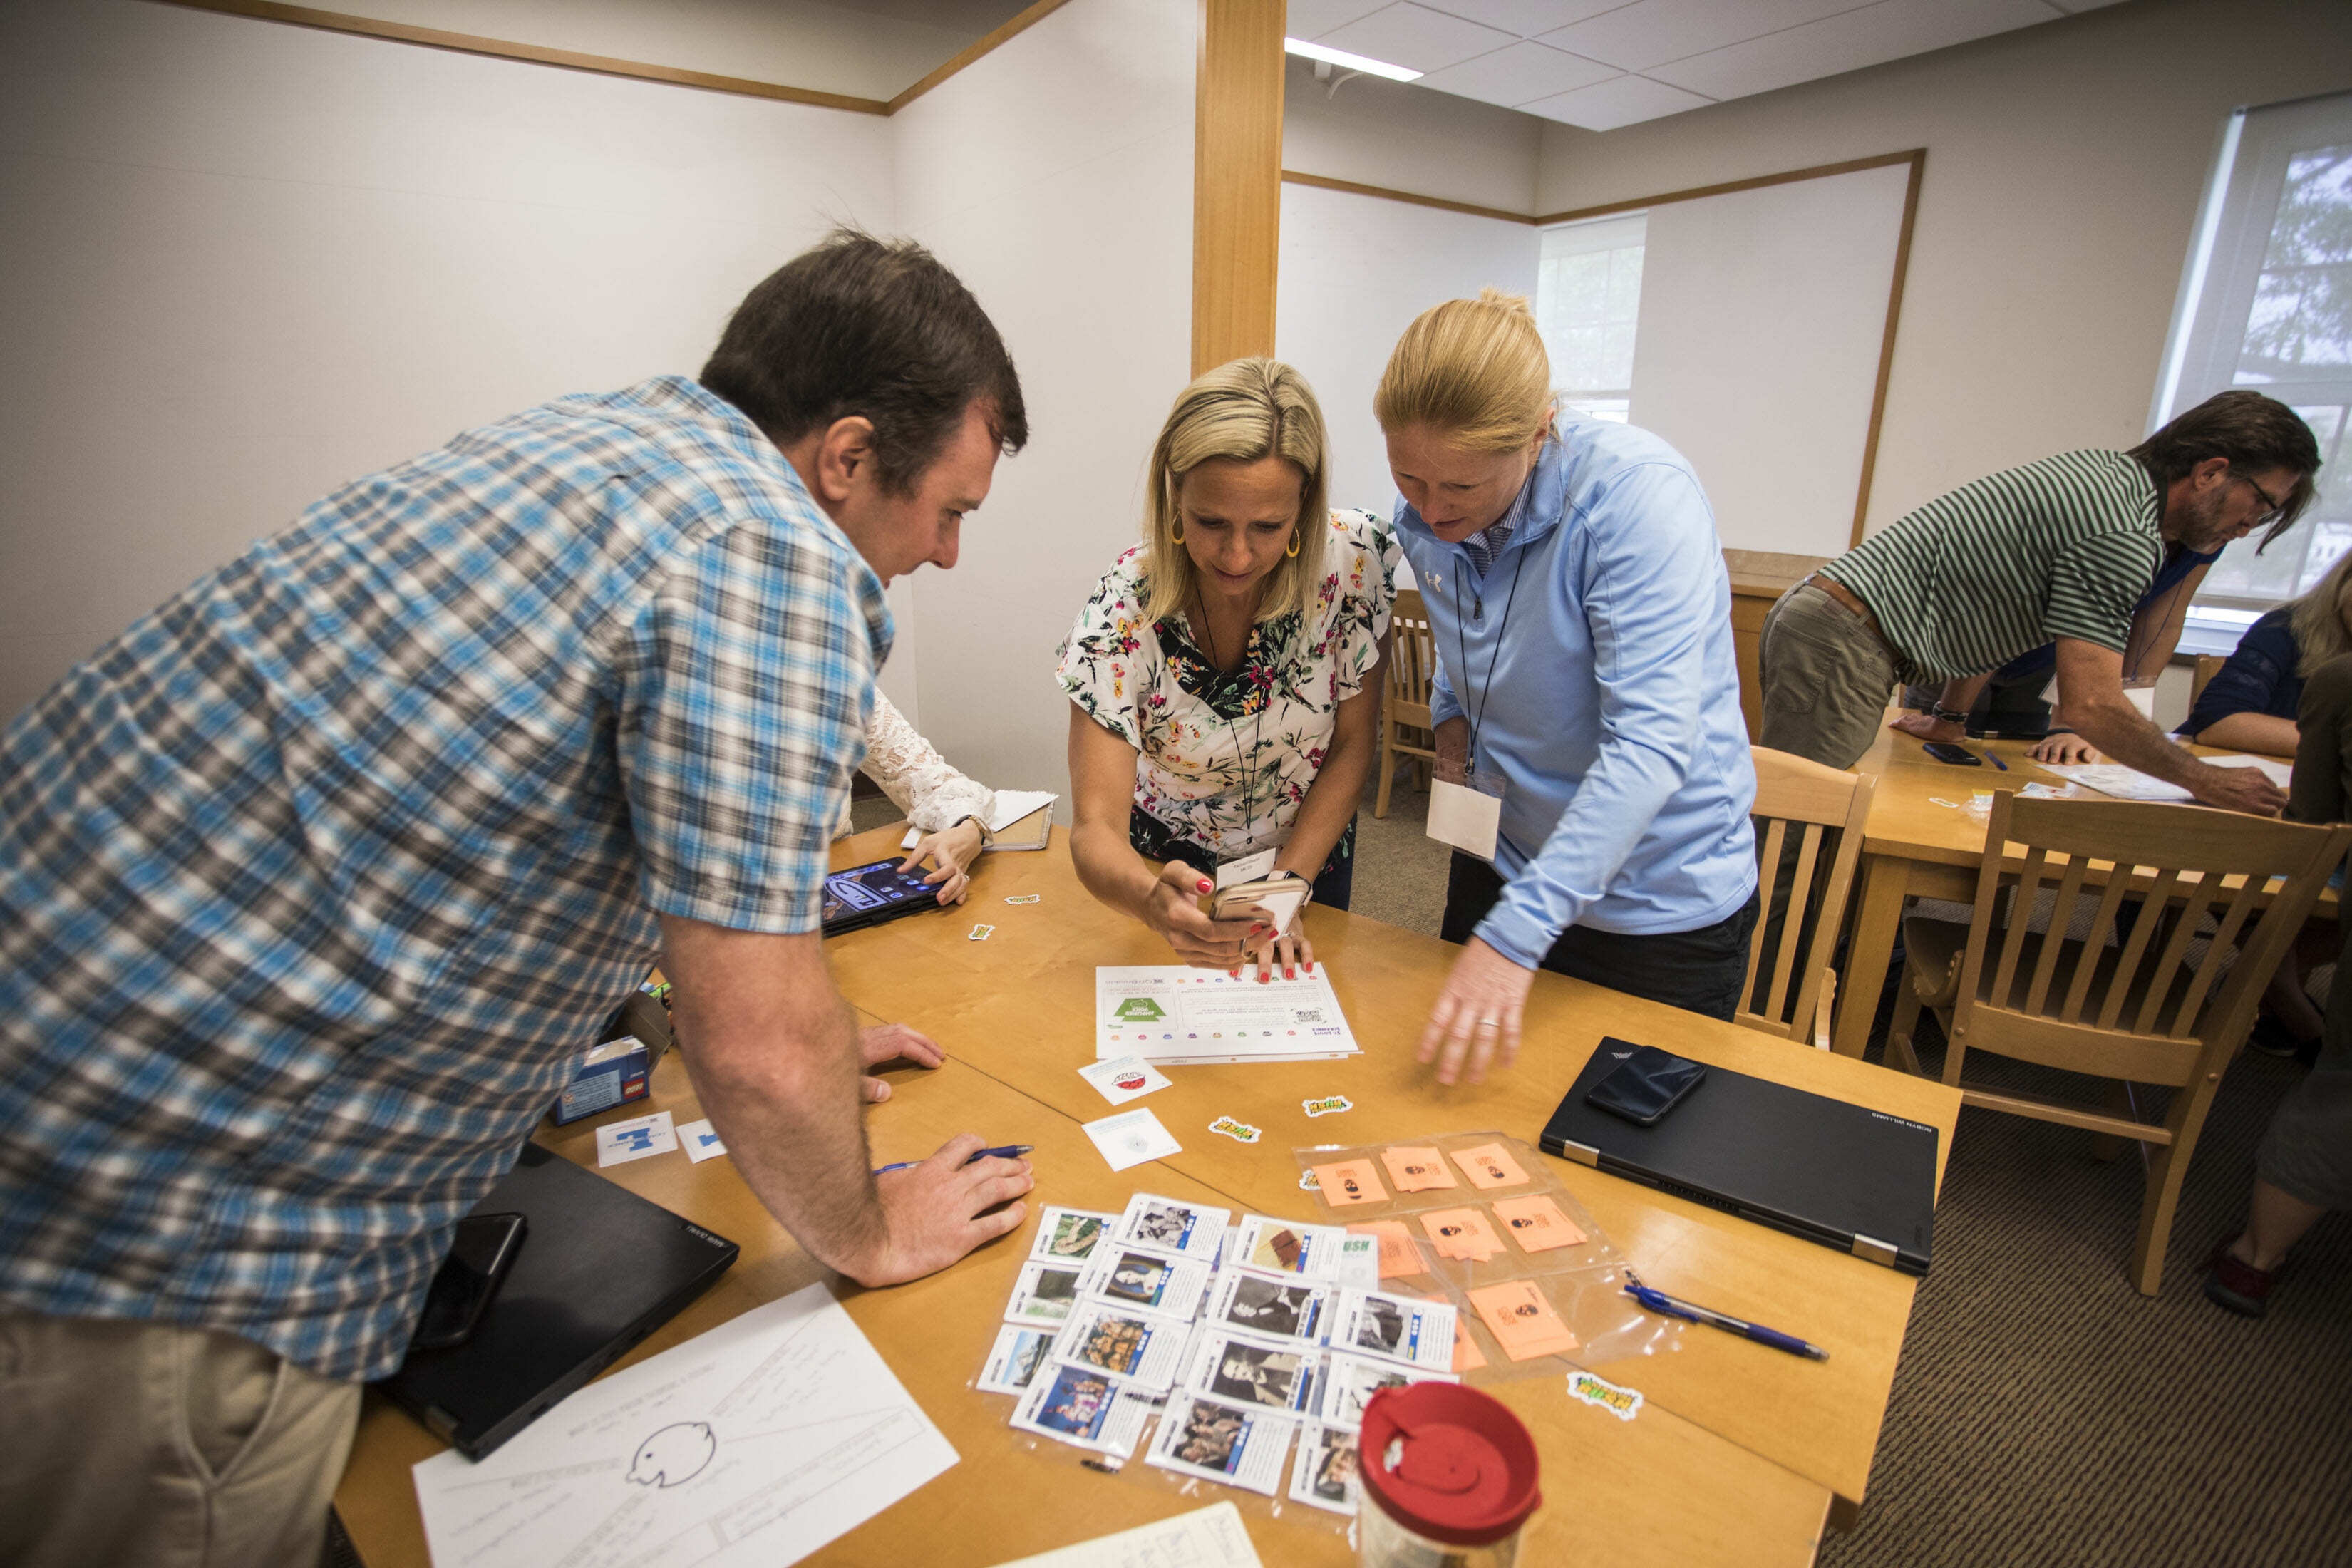 MICDS Faculty Work On Professional Development with Summer